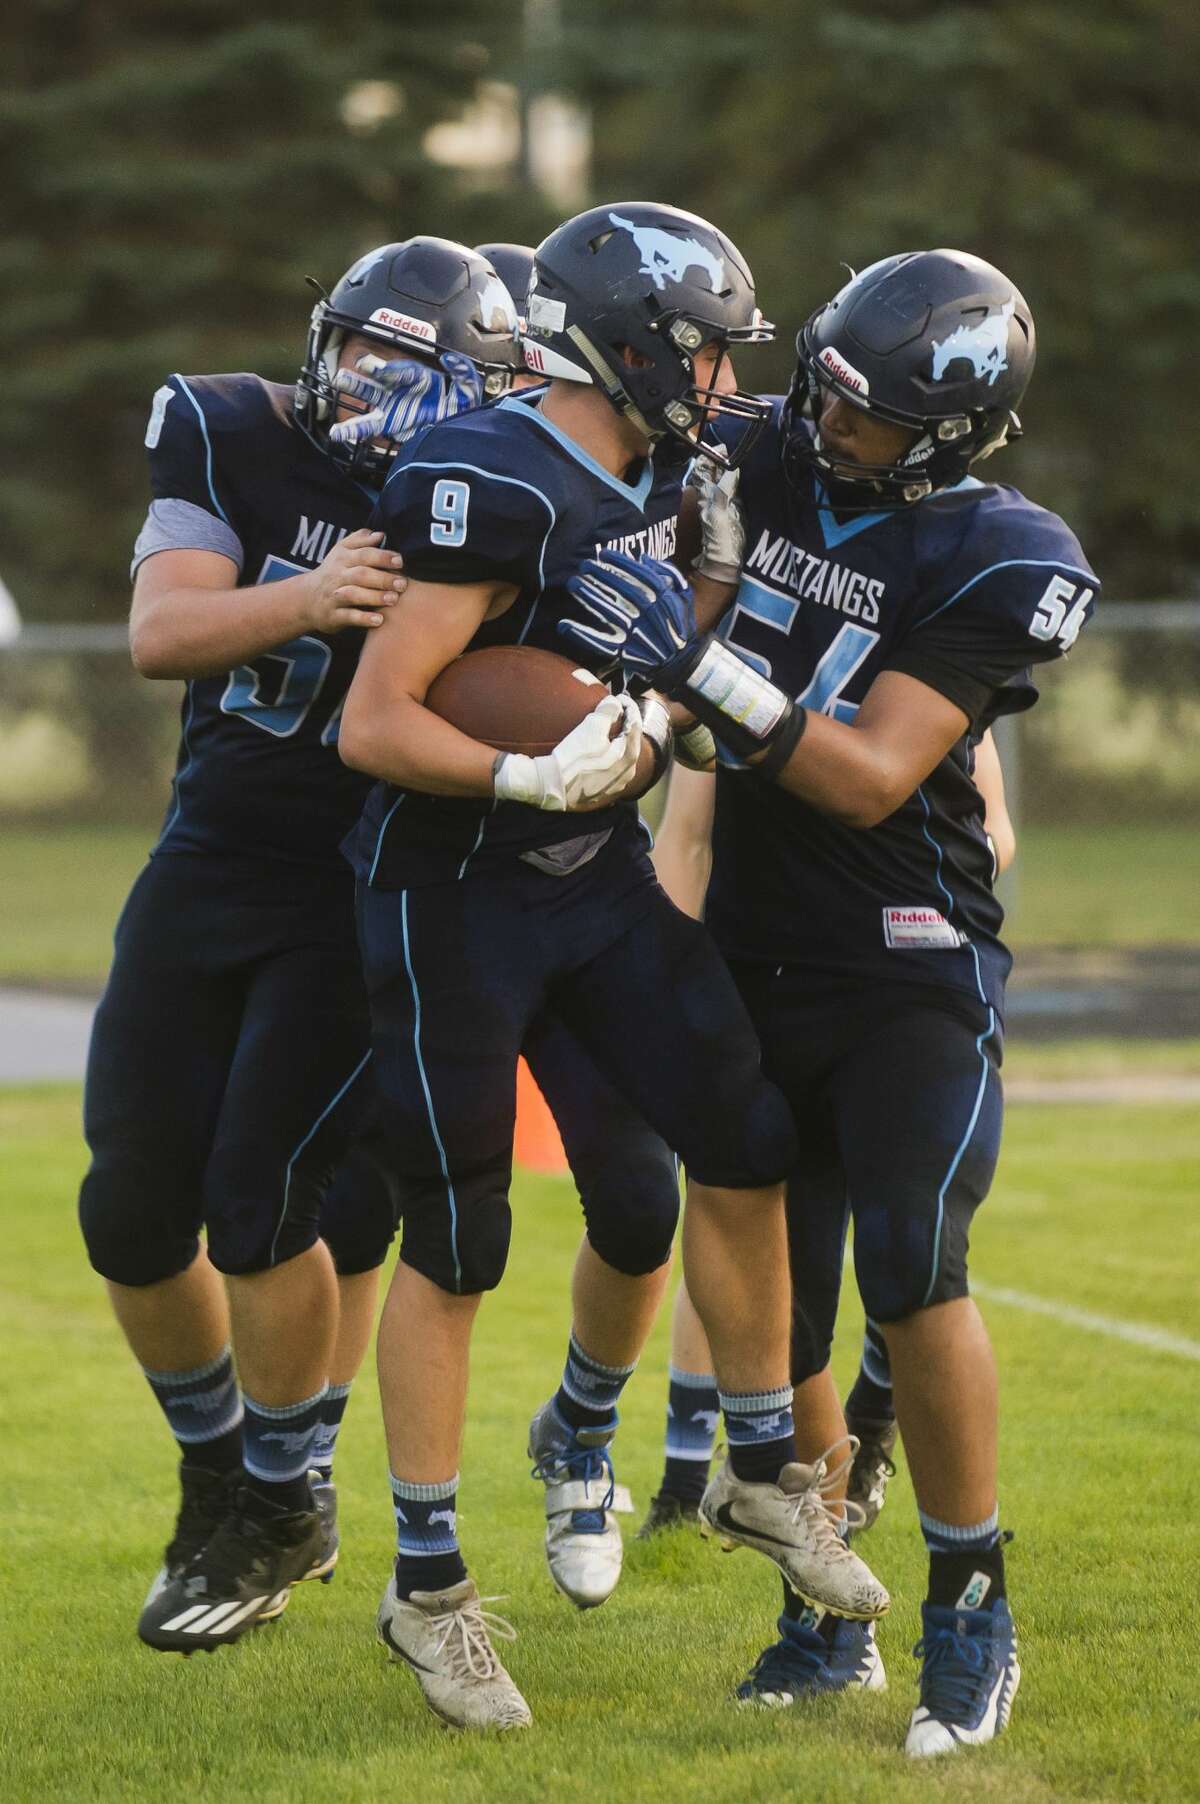 Meridian players celebrate a touchdown by sophomore Brady Solano, center, during Meridian's game against Roscommon on Friday, September 15, 2017 at Meridian Early College High School. (Katy Kildee/kkildee@mdn.net)